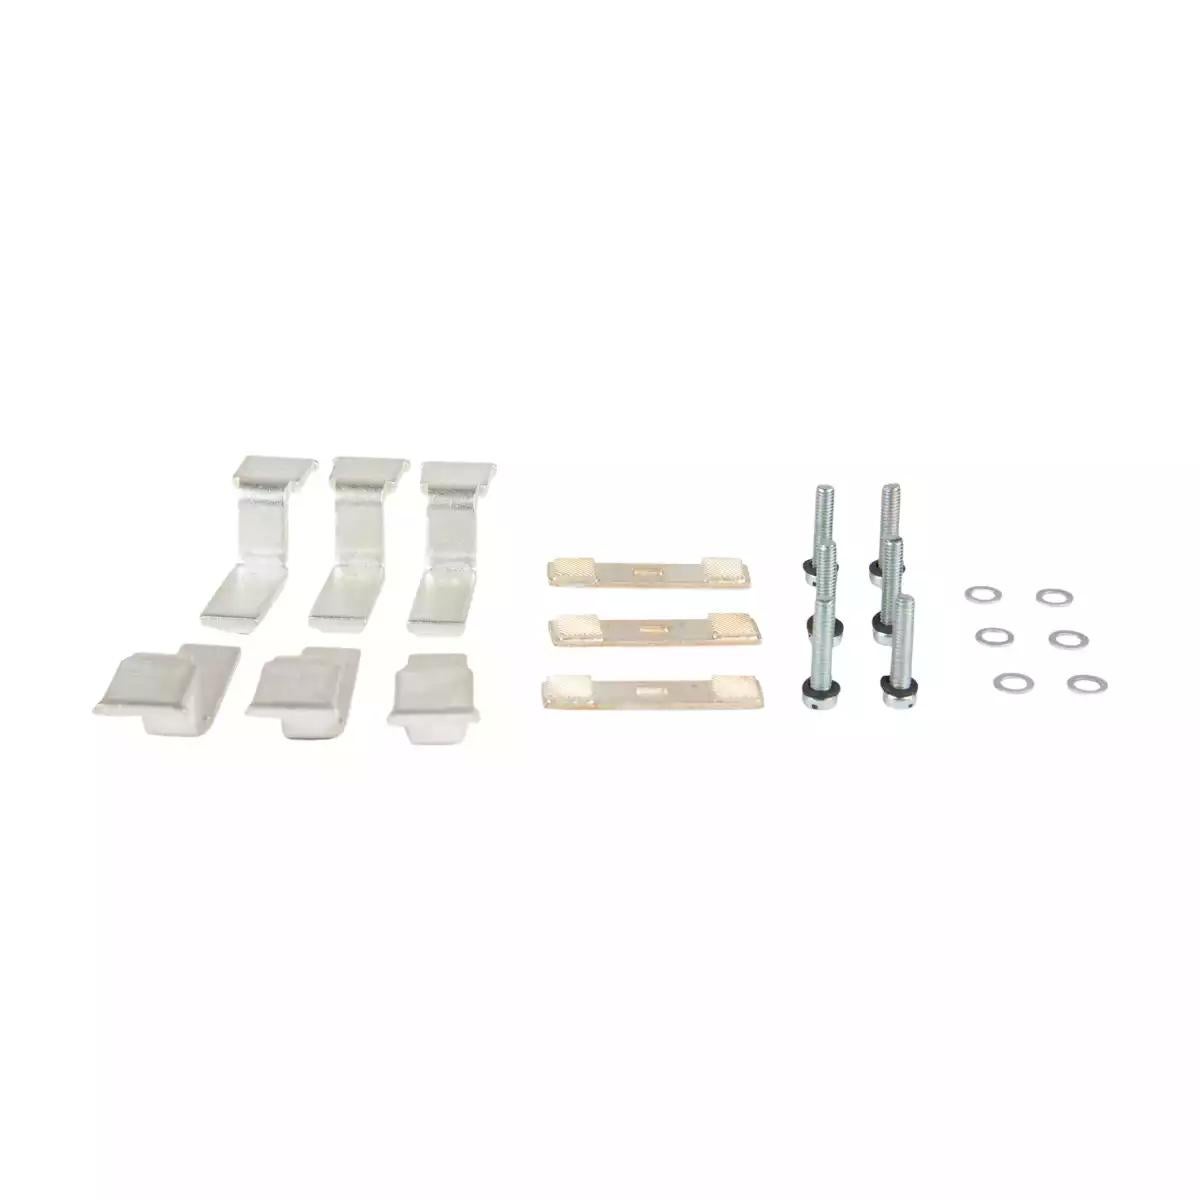 MO 50 - Spare Contact Kit